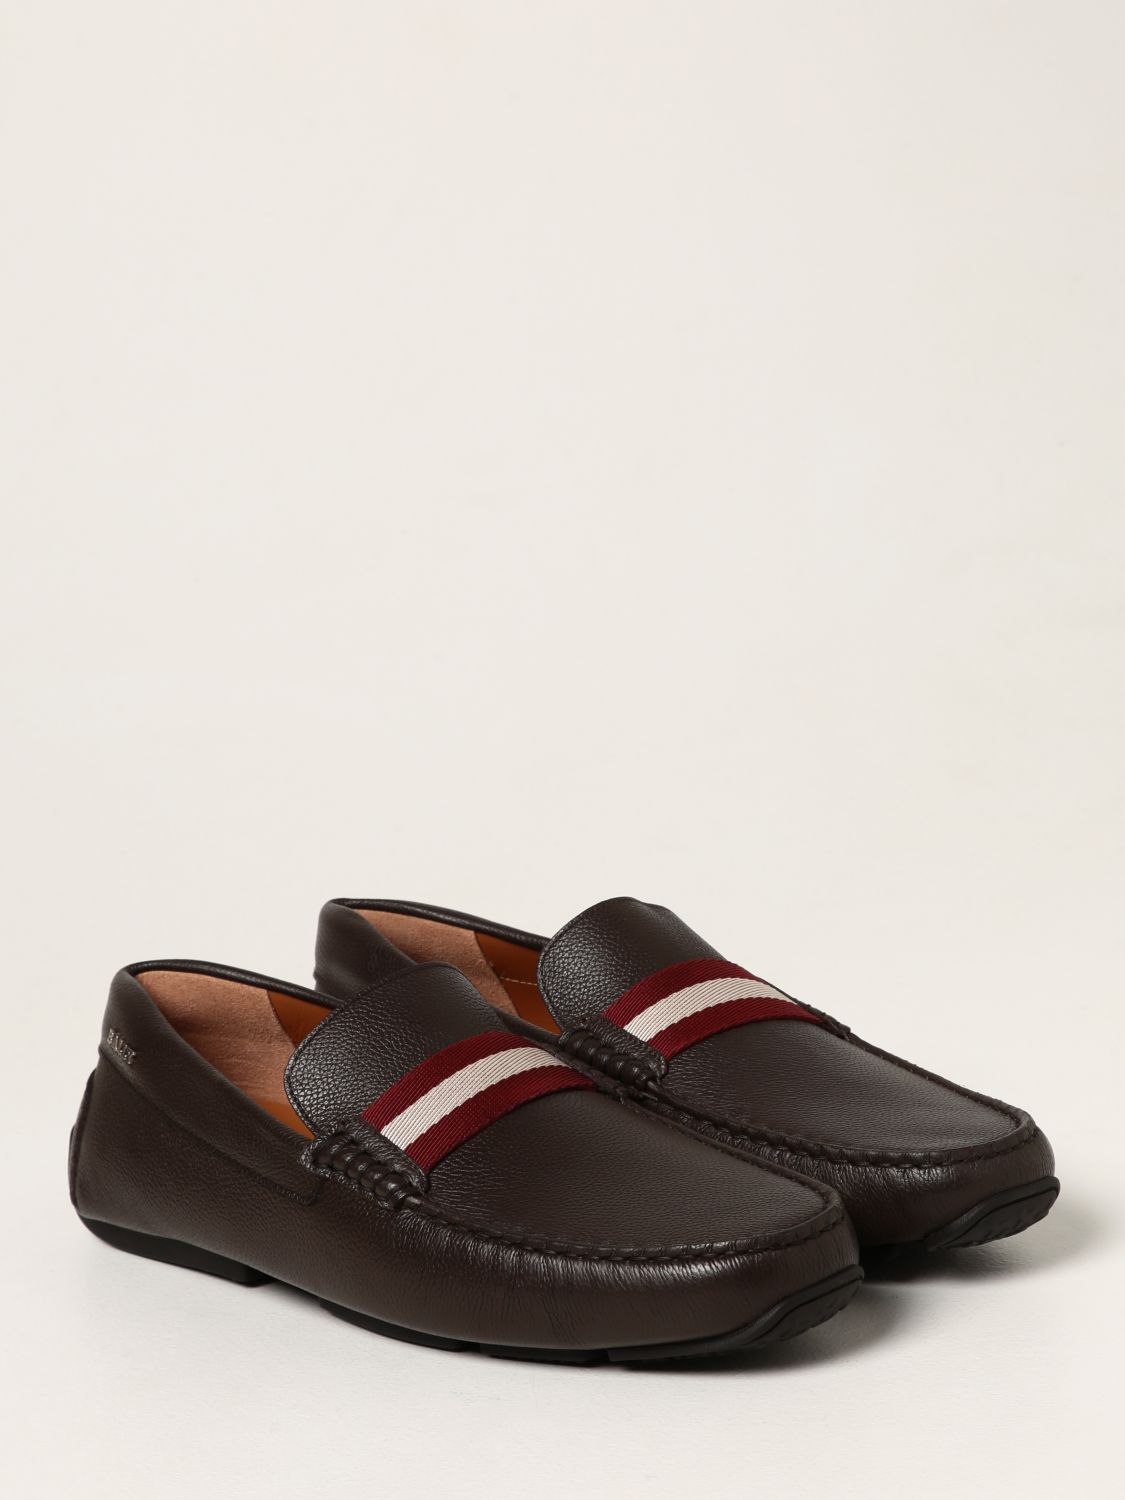 BALLY: Pearce loafer in grained leather - Brown | Loafers Bally 